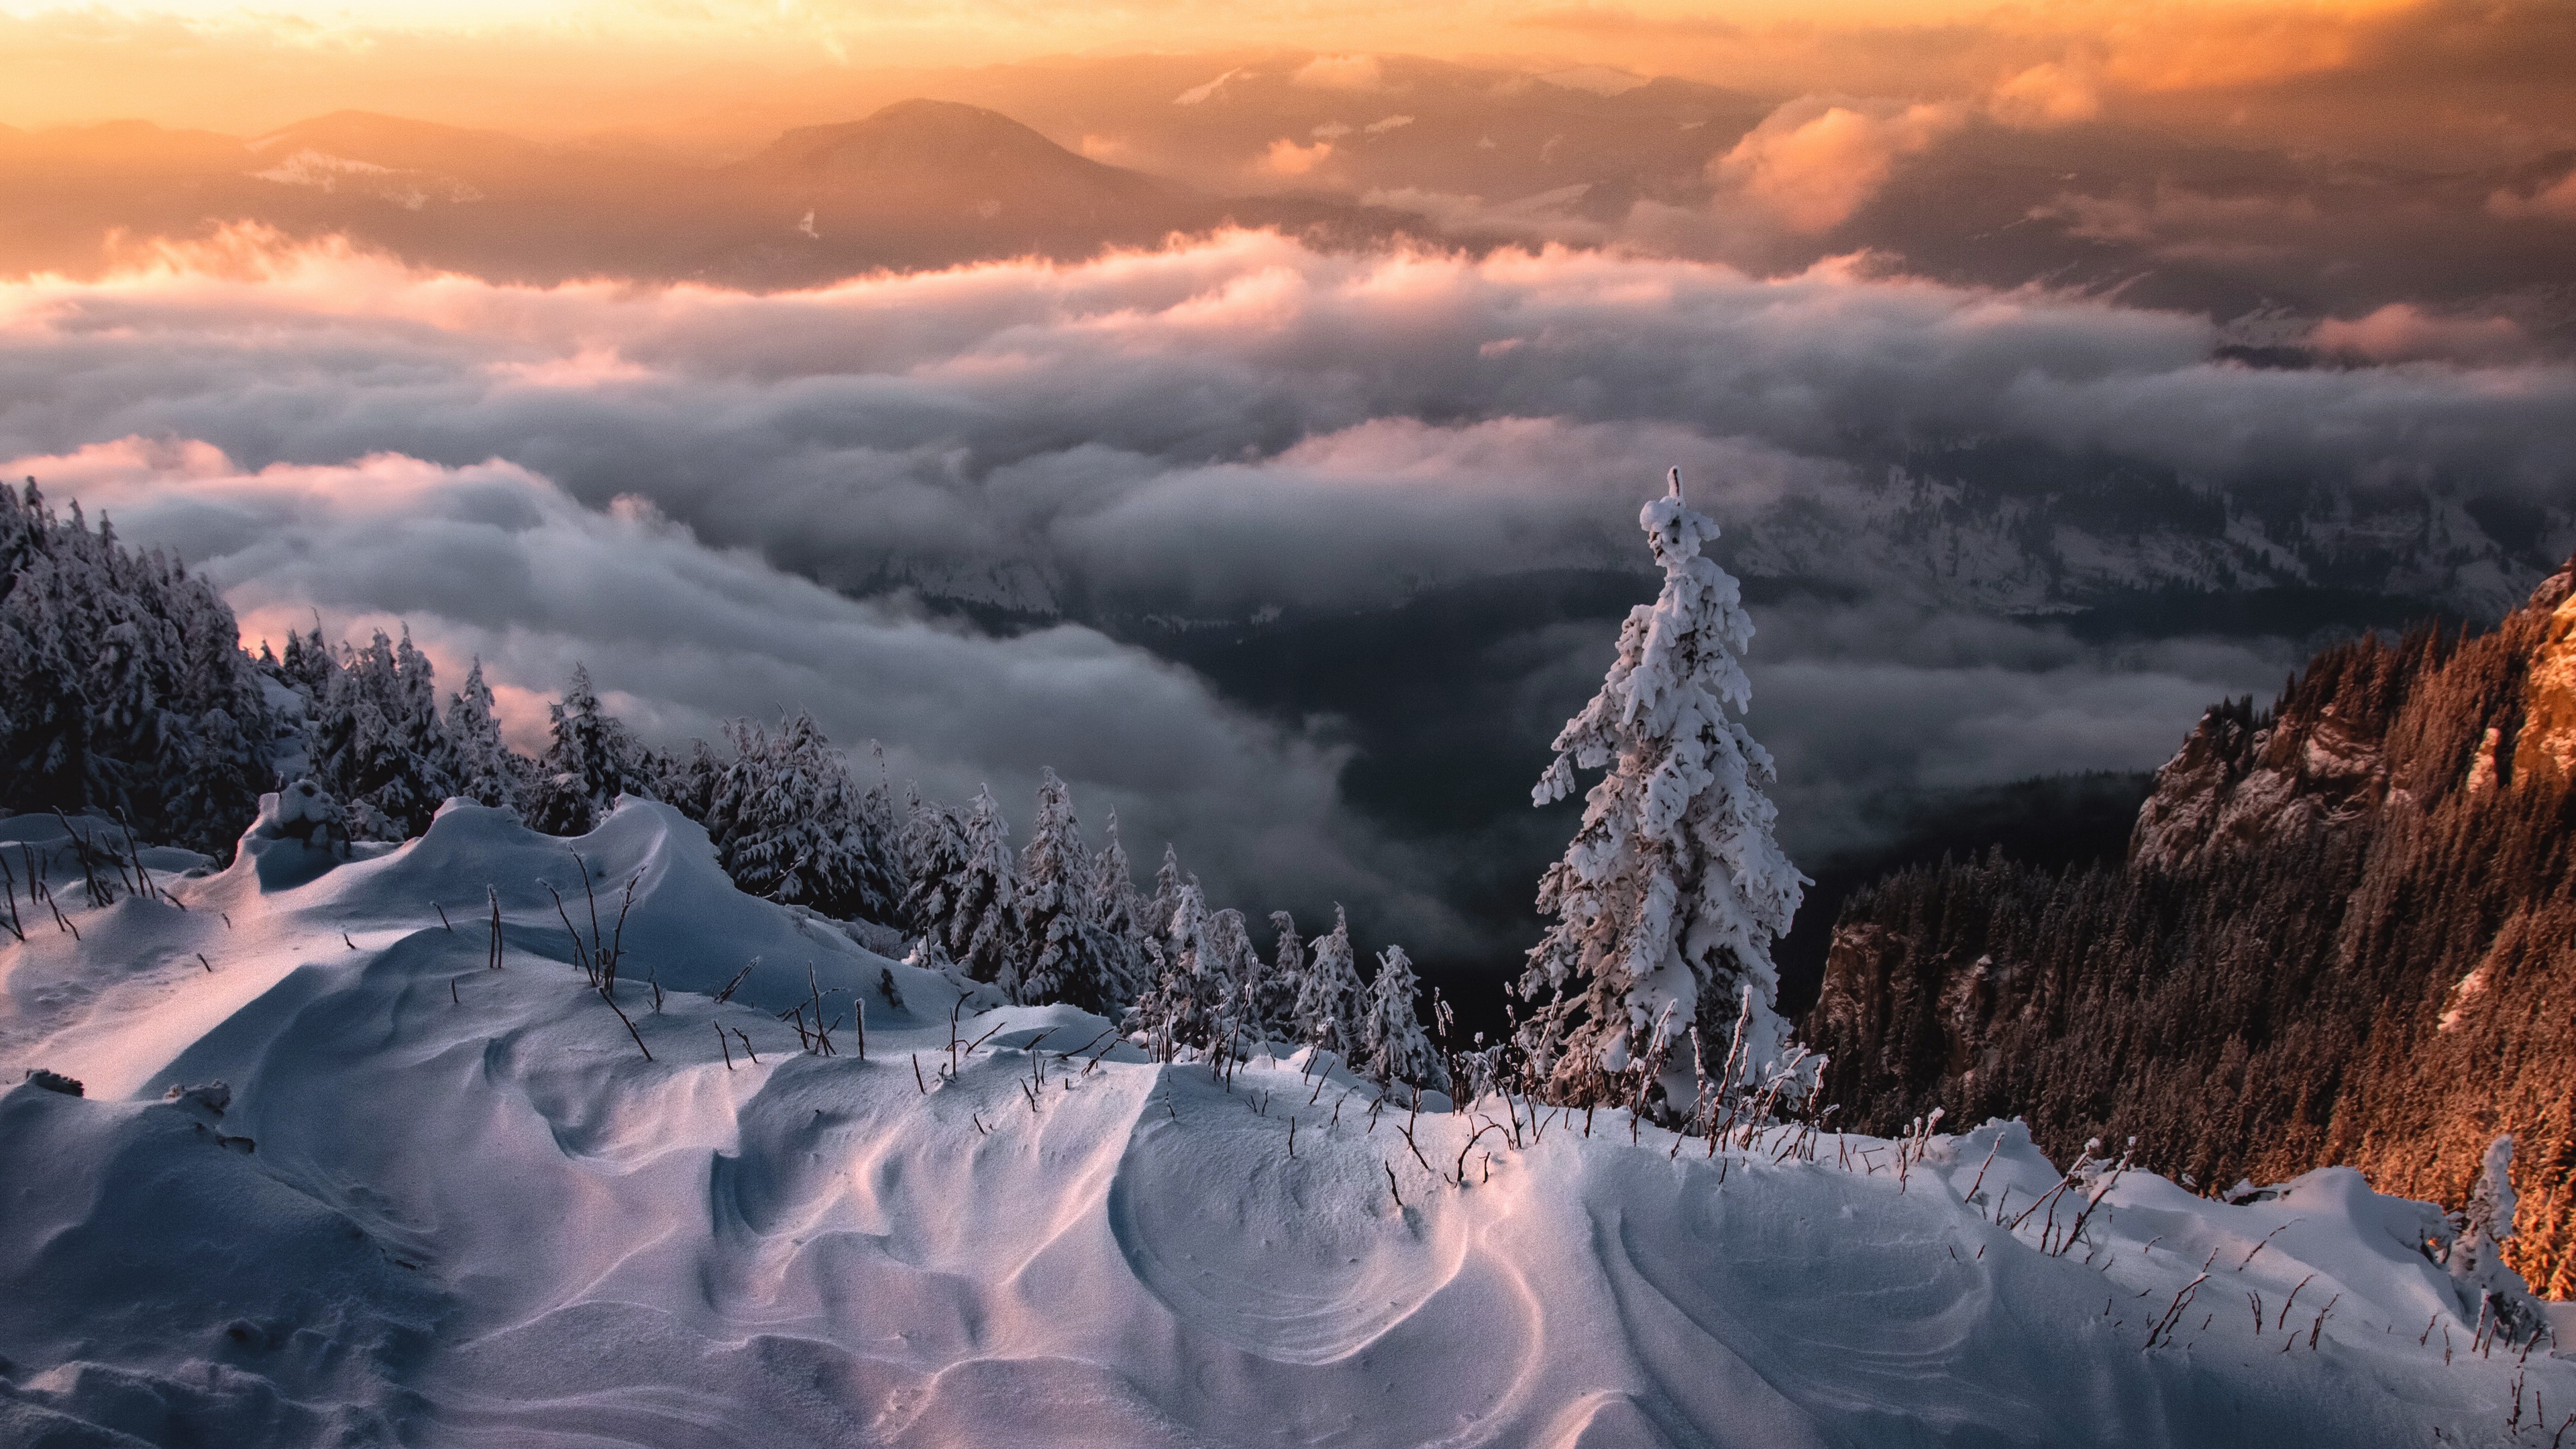 General 3840x2160 nature landscape winter ice snow cold outdoors trees clouds orange sky mountains